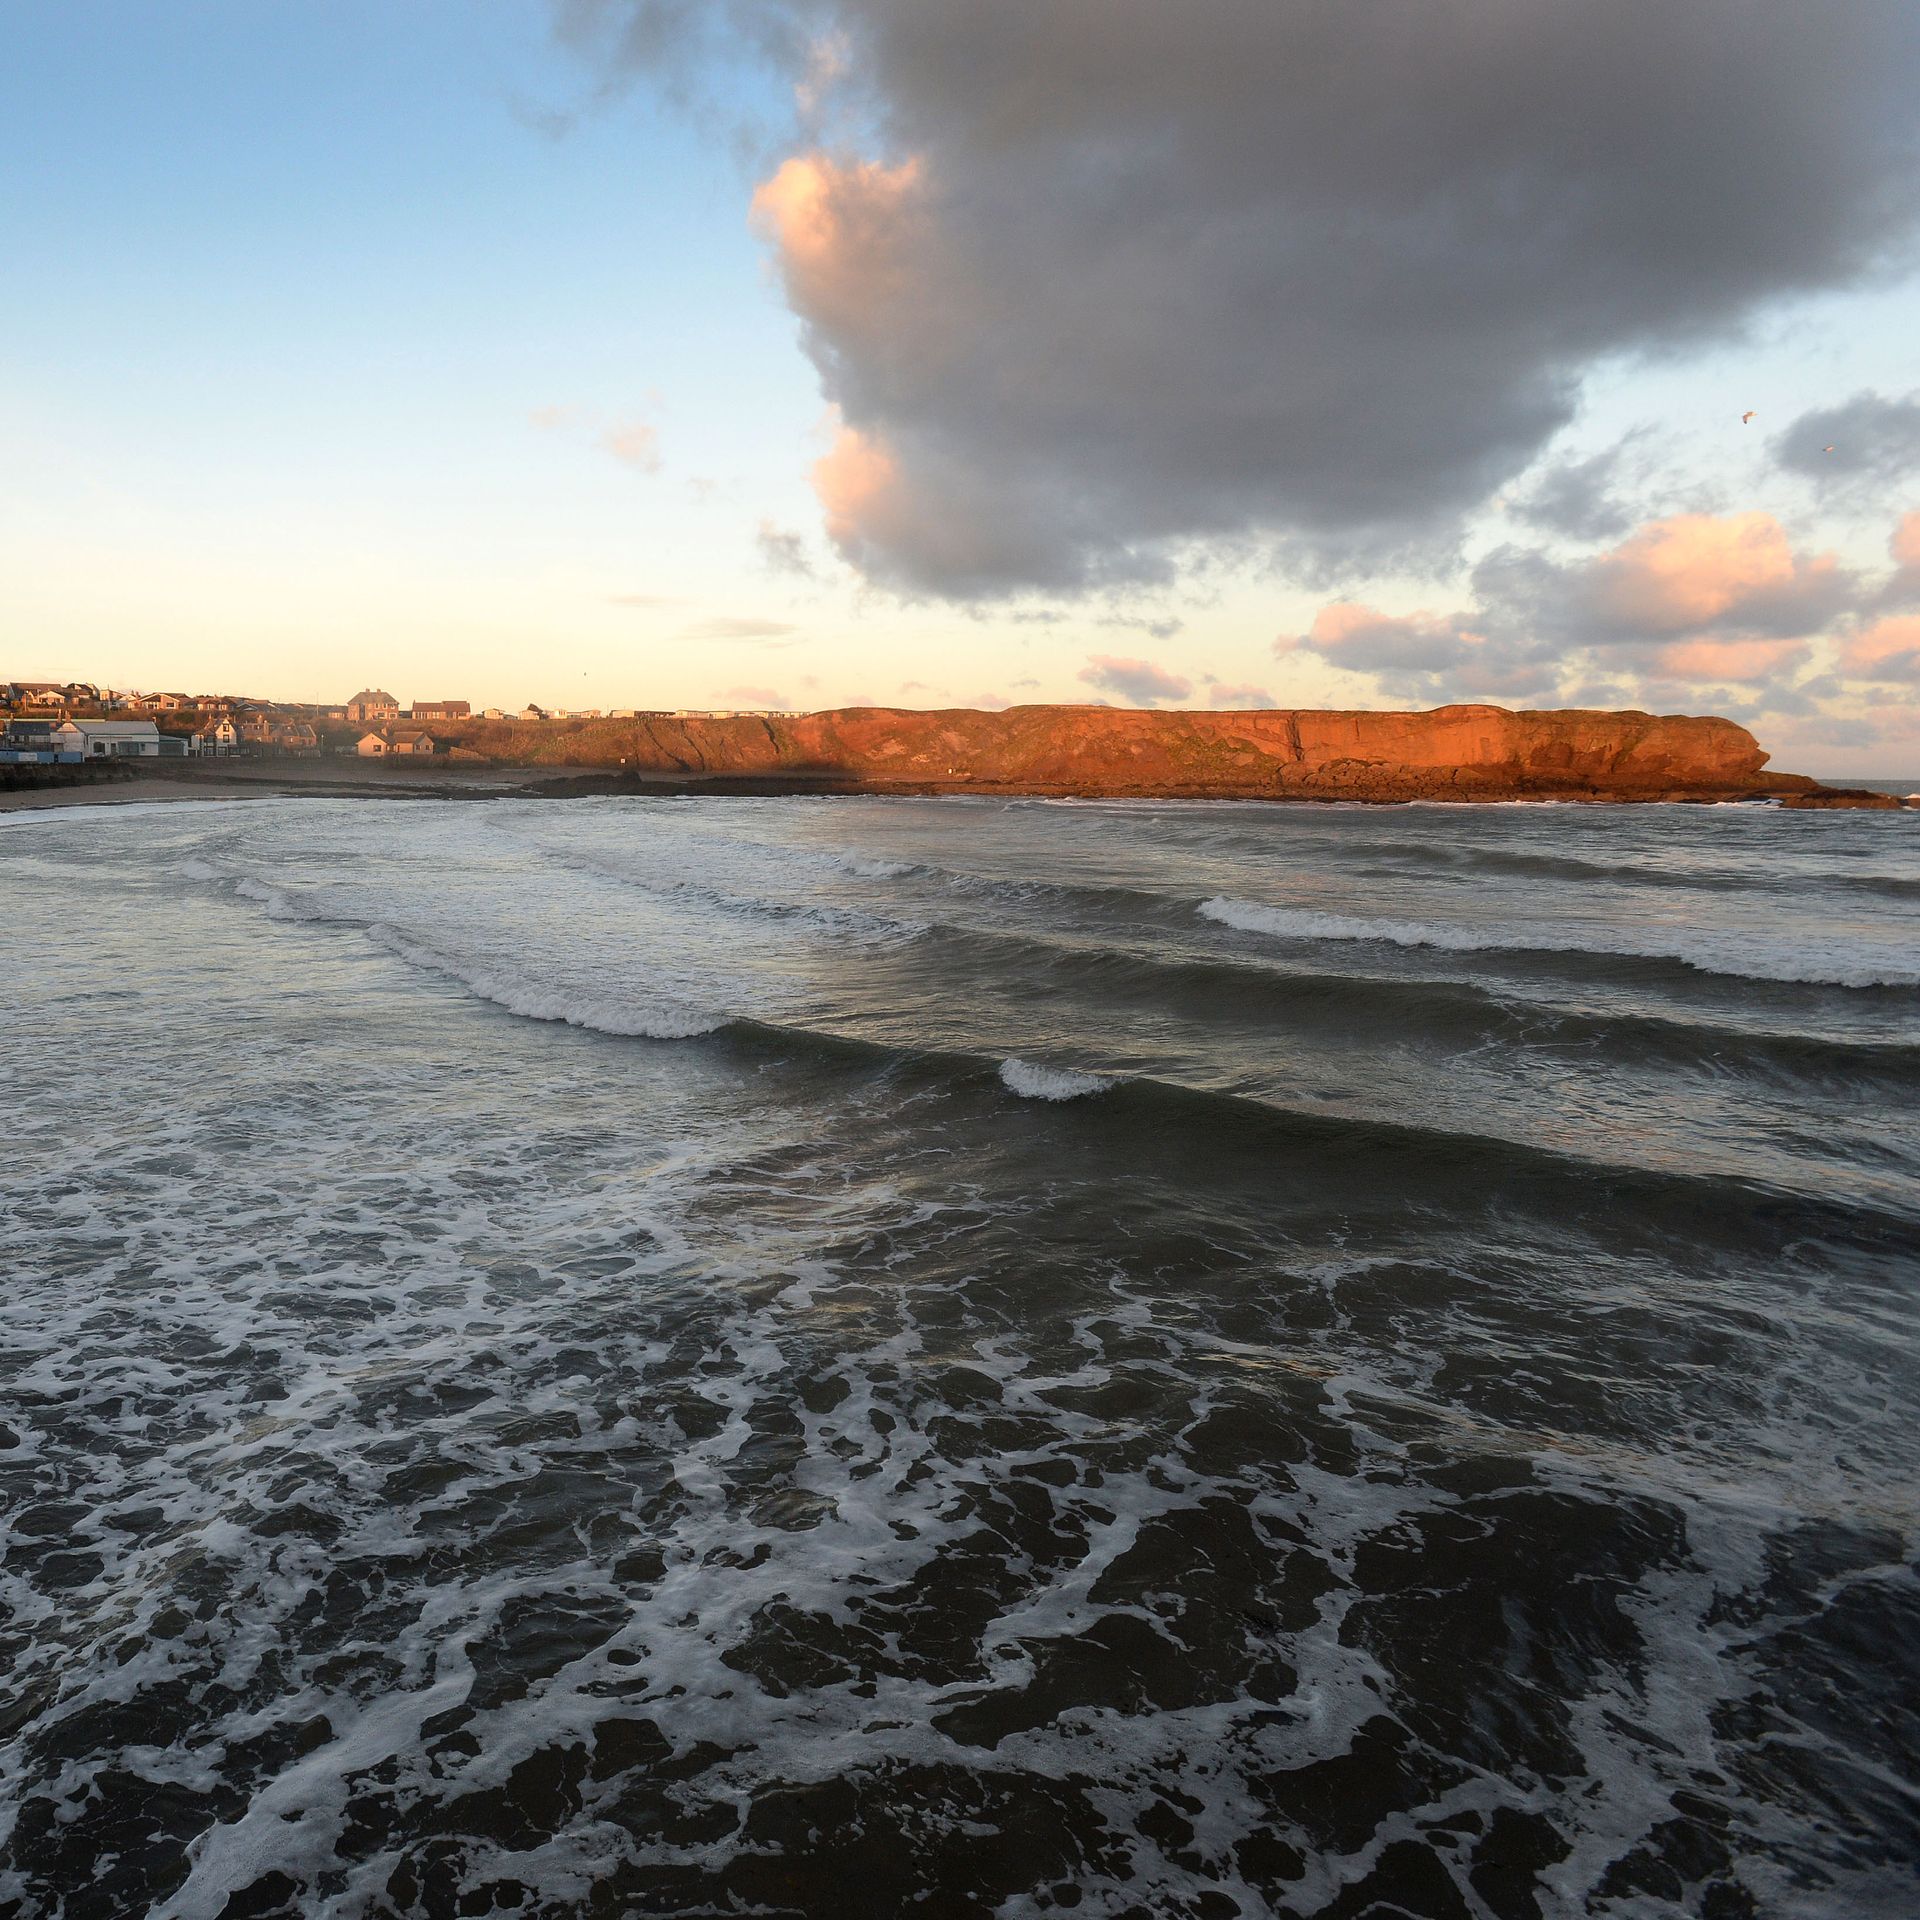 Eyemouth Harbor at sunrise after a tidal storm surge overnight on December 6, 2013 in Eyemouth, Scotland.